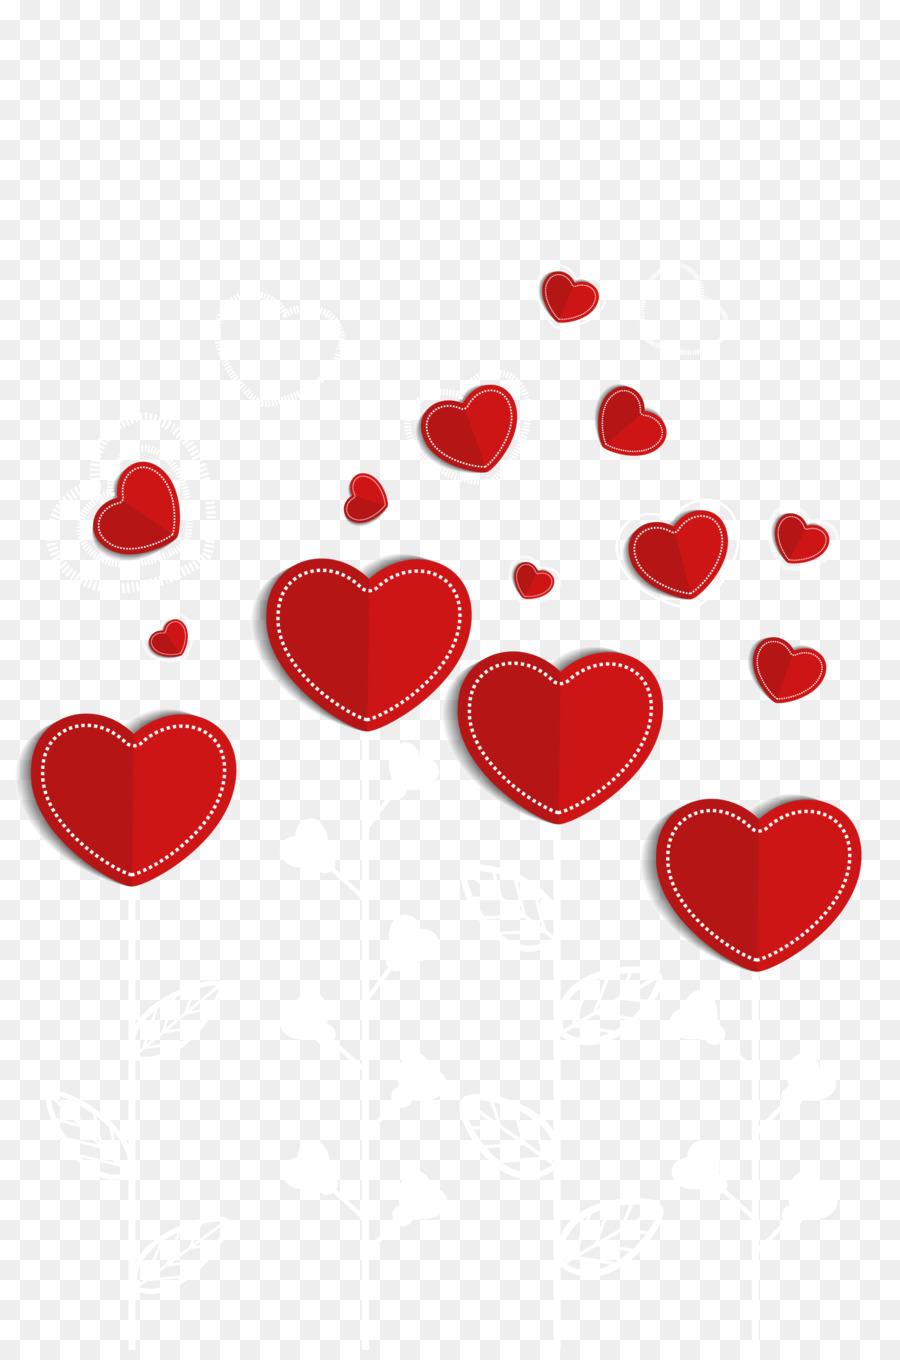 Heart Valentines Day - Red heart balloon vector png download - 1701*2551 - Free Transparent Heart png Download.